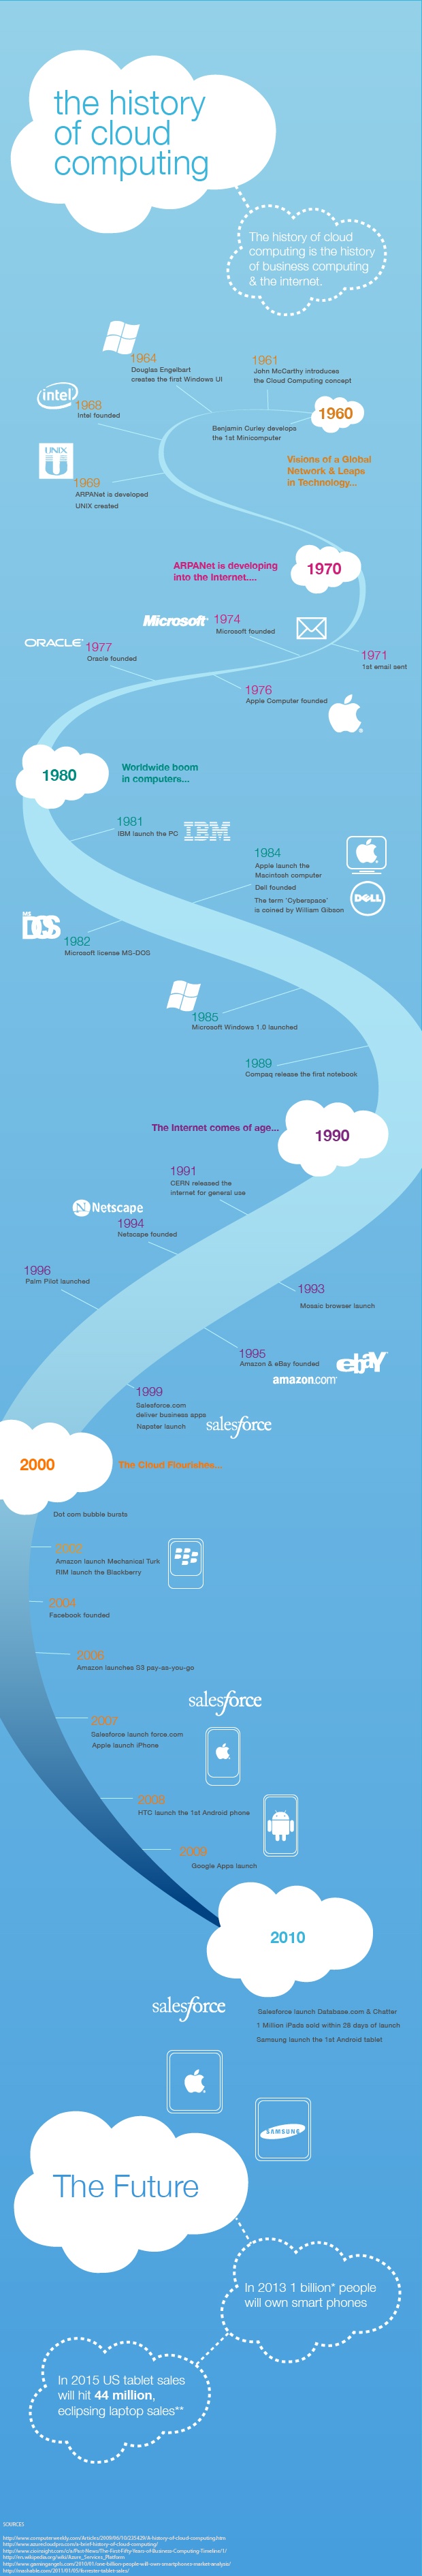 The history of cloud computing